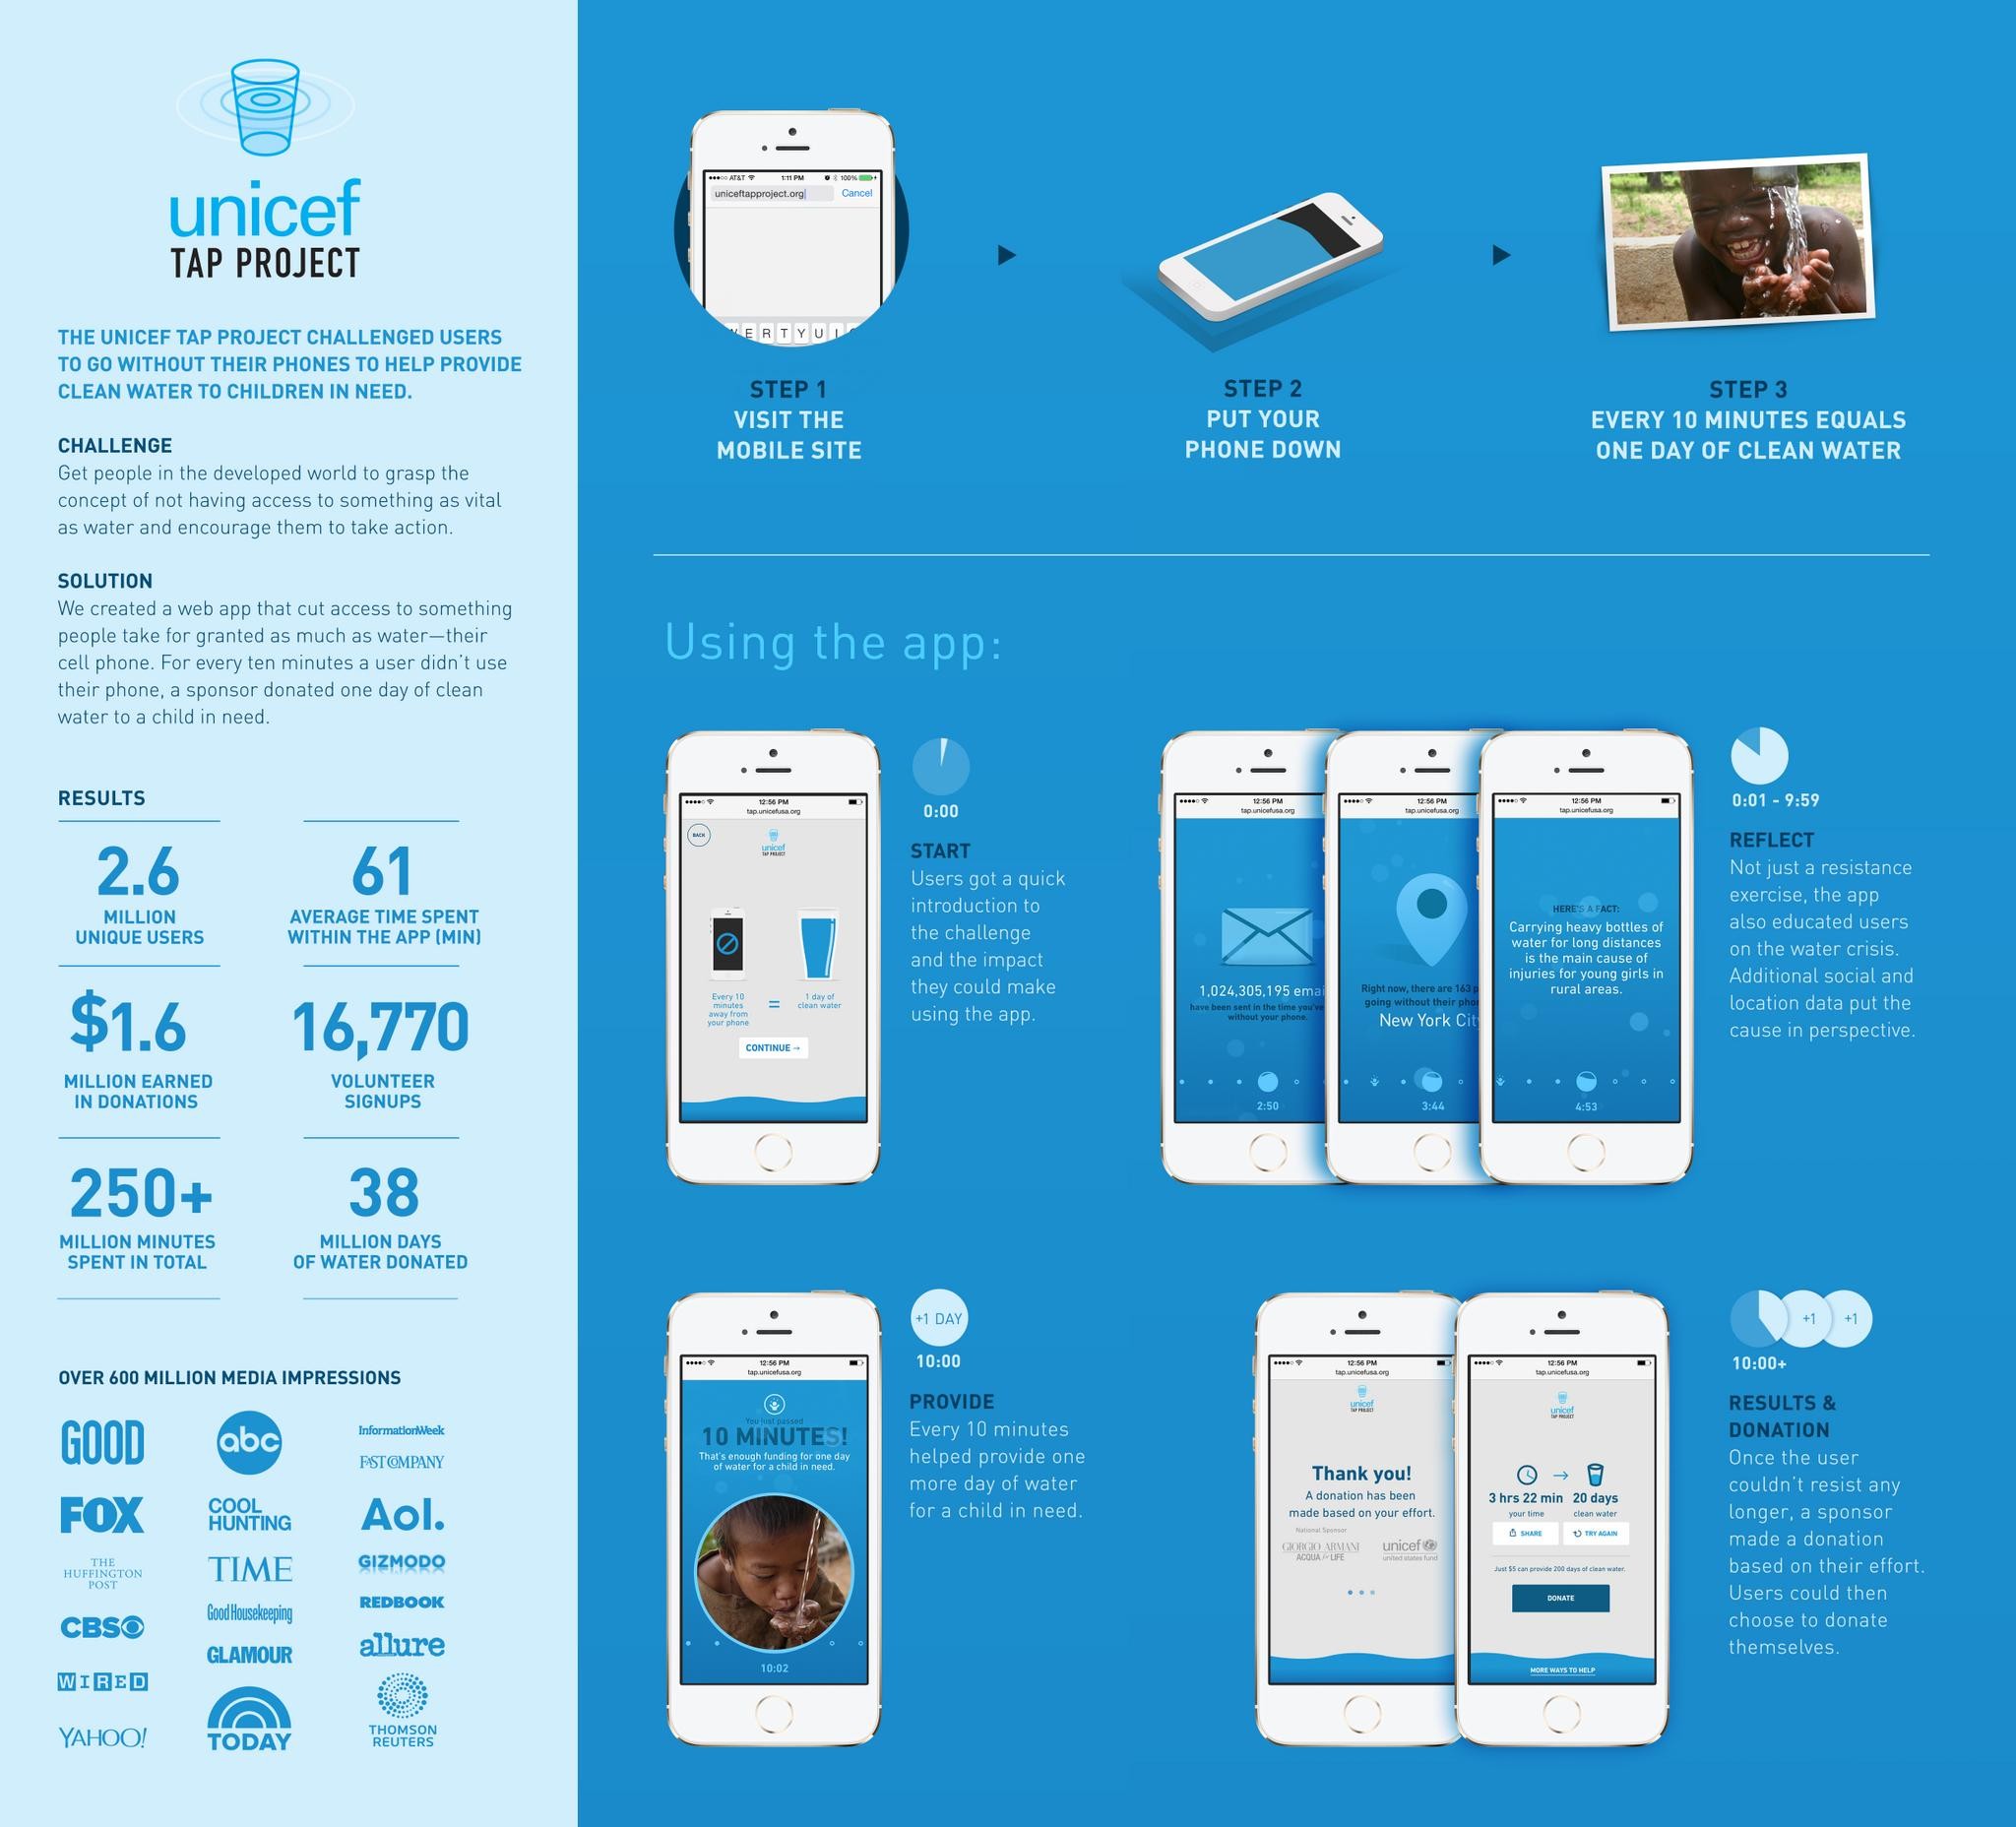 UNICEF TAP PROJECT 2014